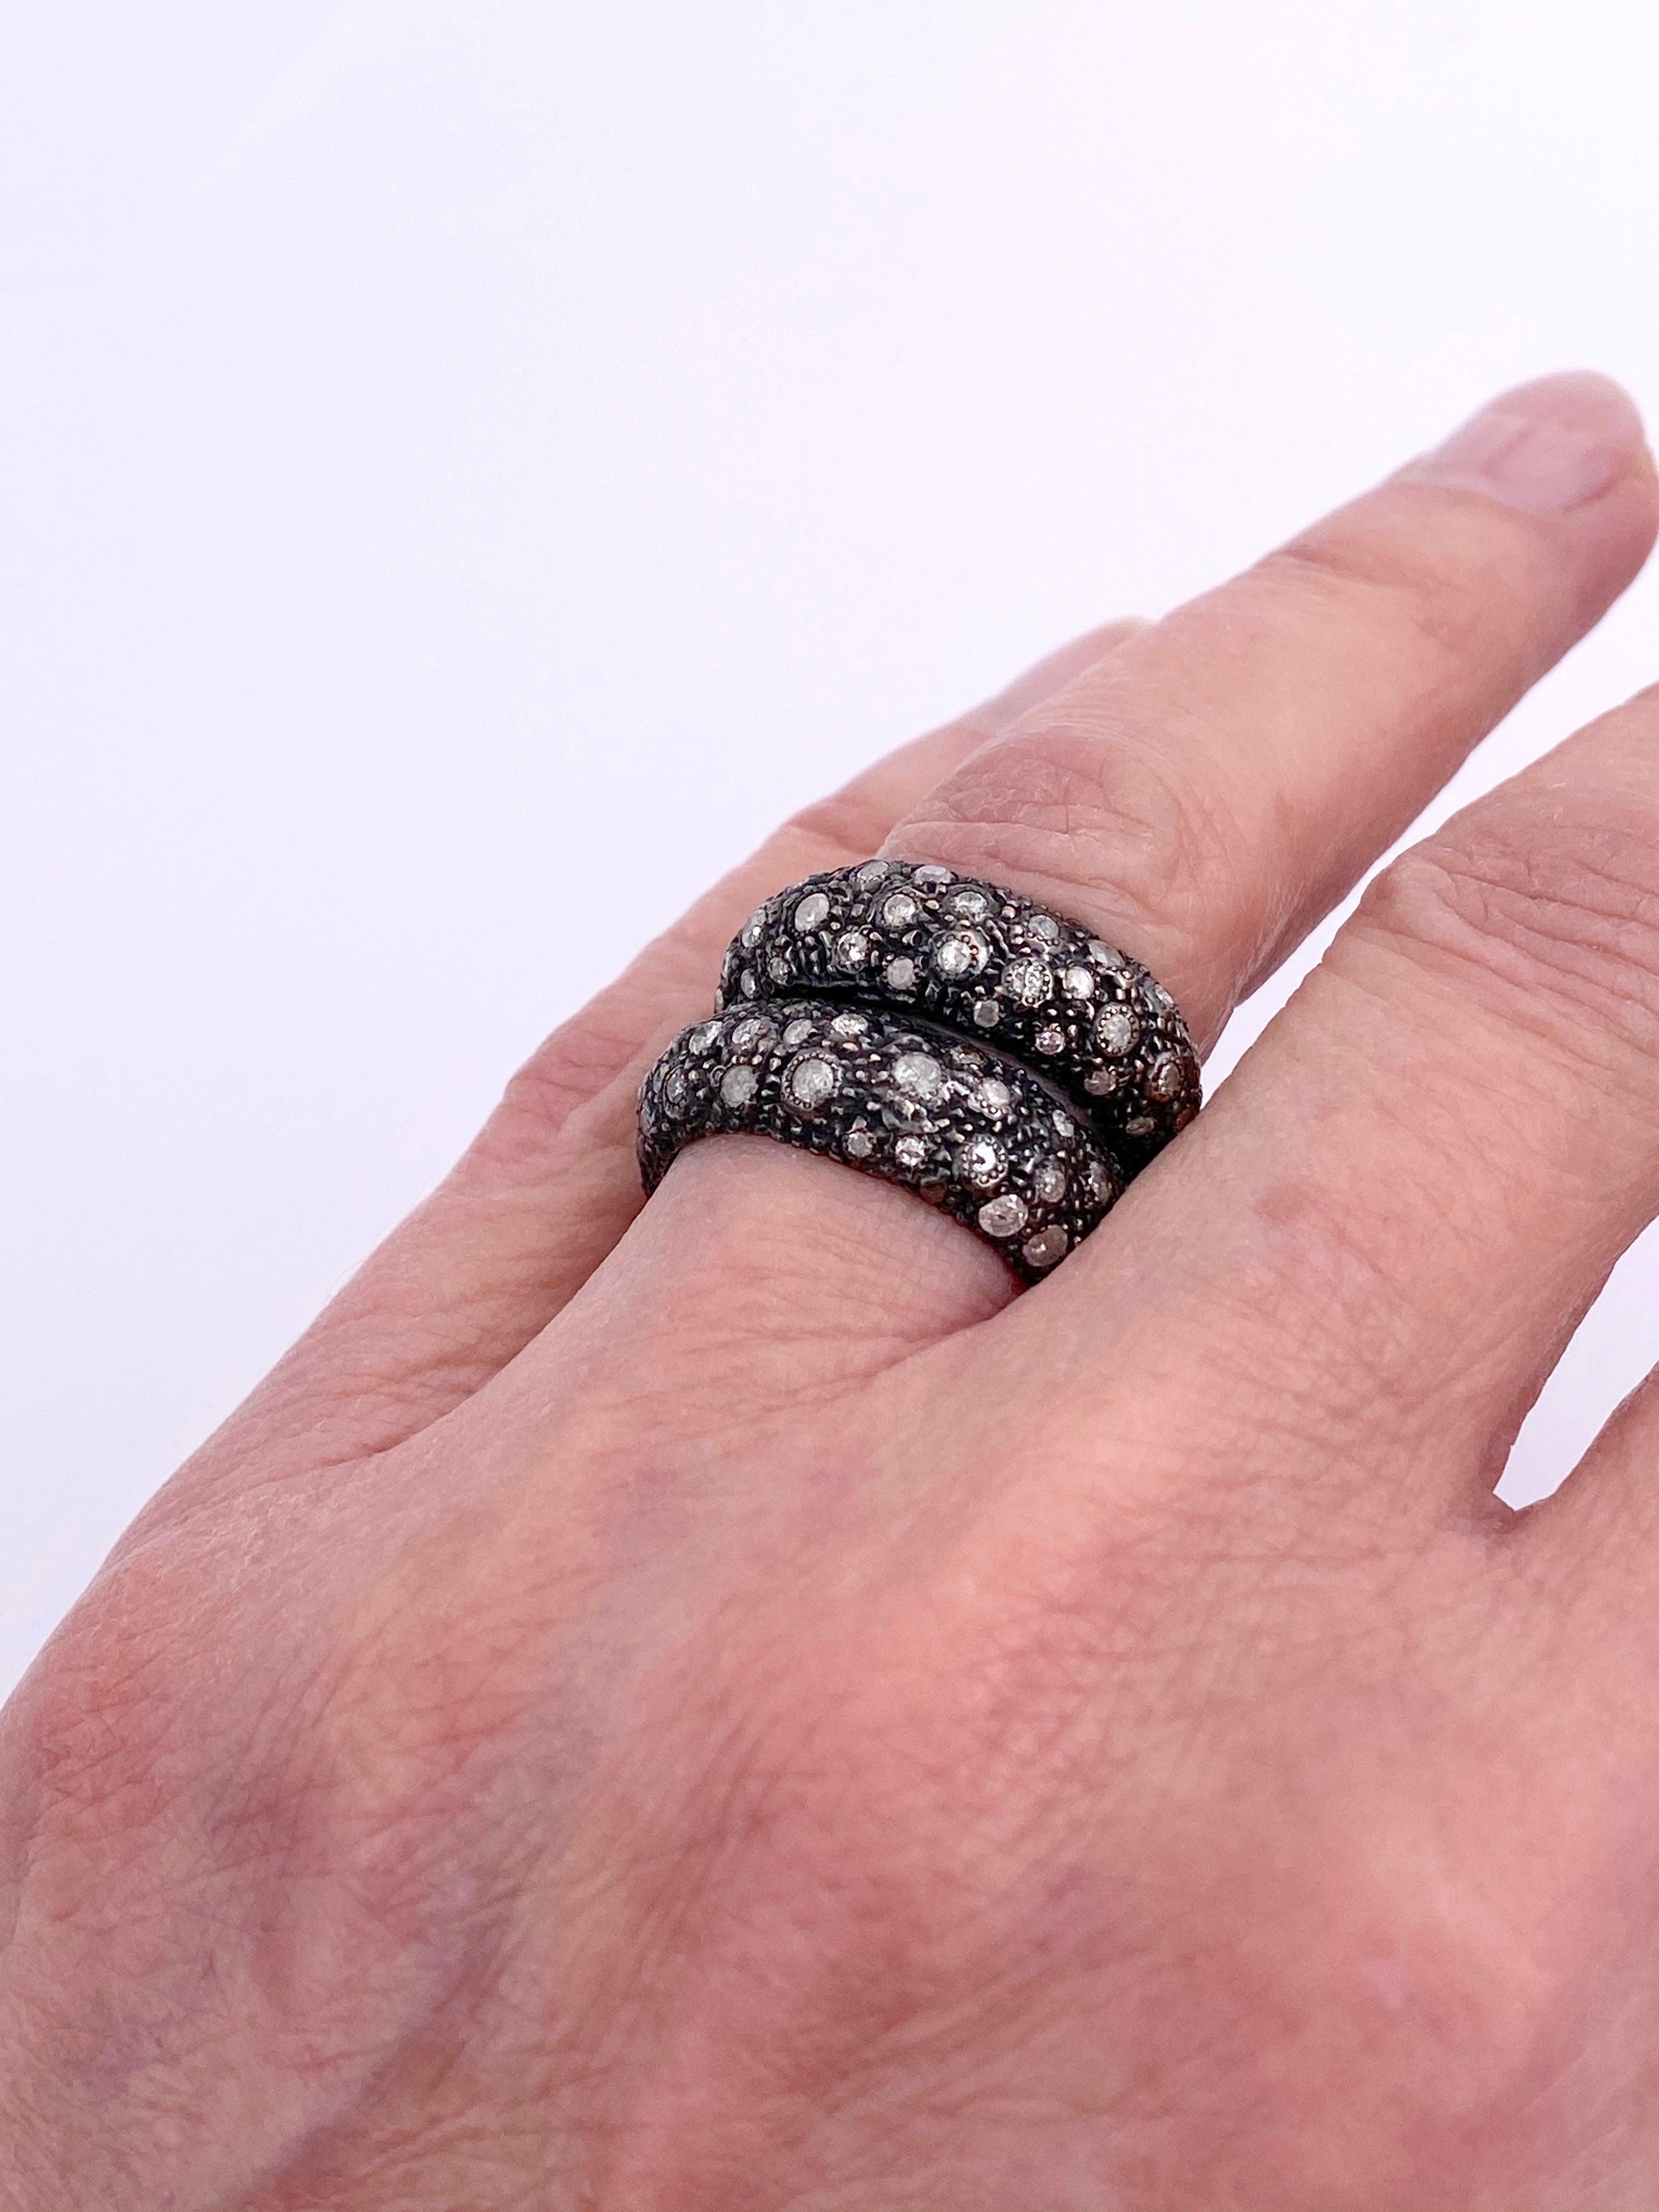 18 Karat Rose Gold Black Rhodium 2.25 karat Grey Diamonds Rope Design Ring
This ring is totally handcrafted in 18 karat black rhodium rose gold and embellished with nice 2.25 karat grey diamonds. 
Every size available in two weeks by order.